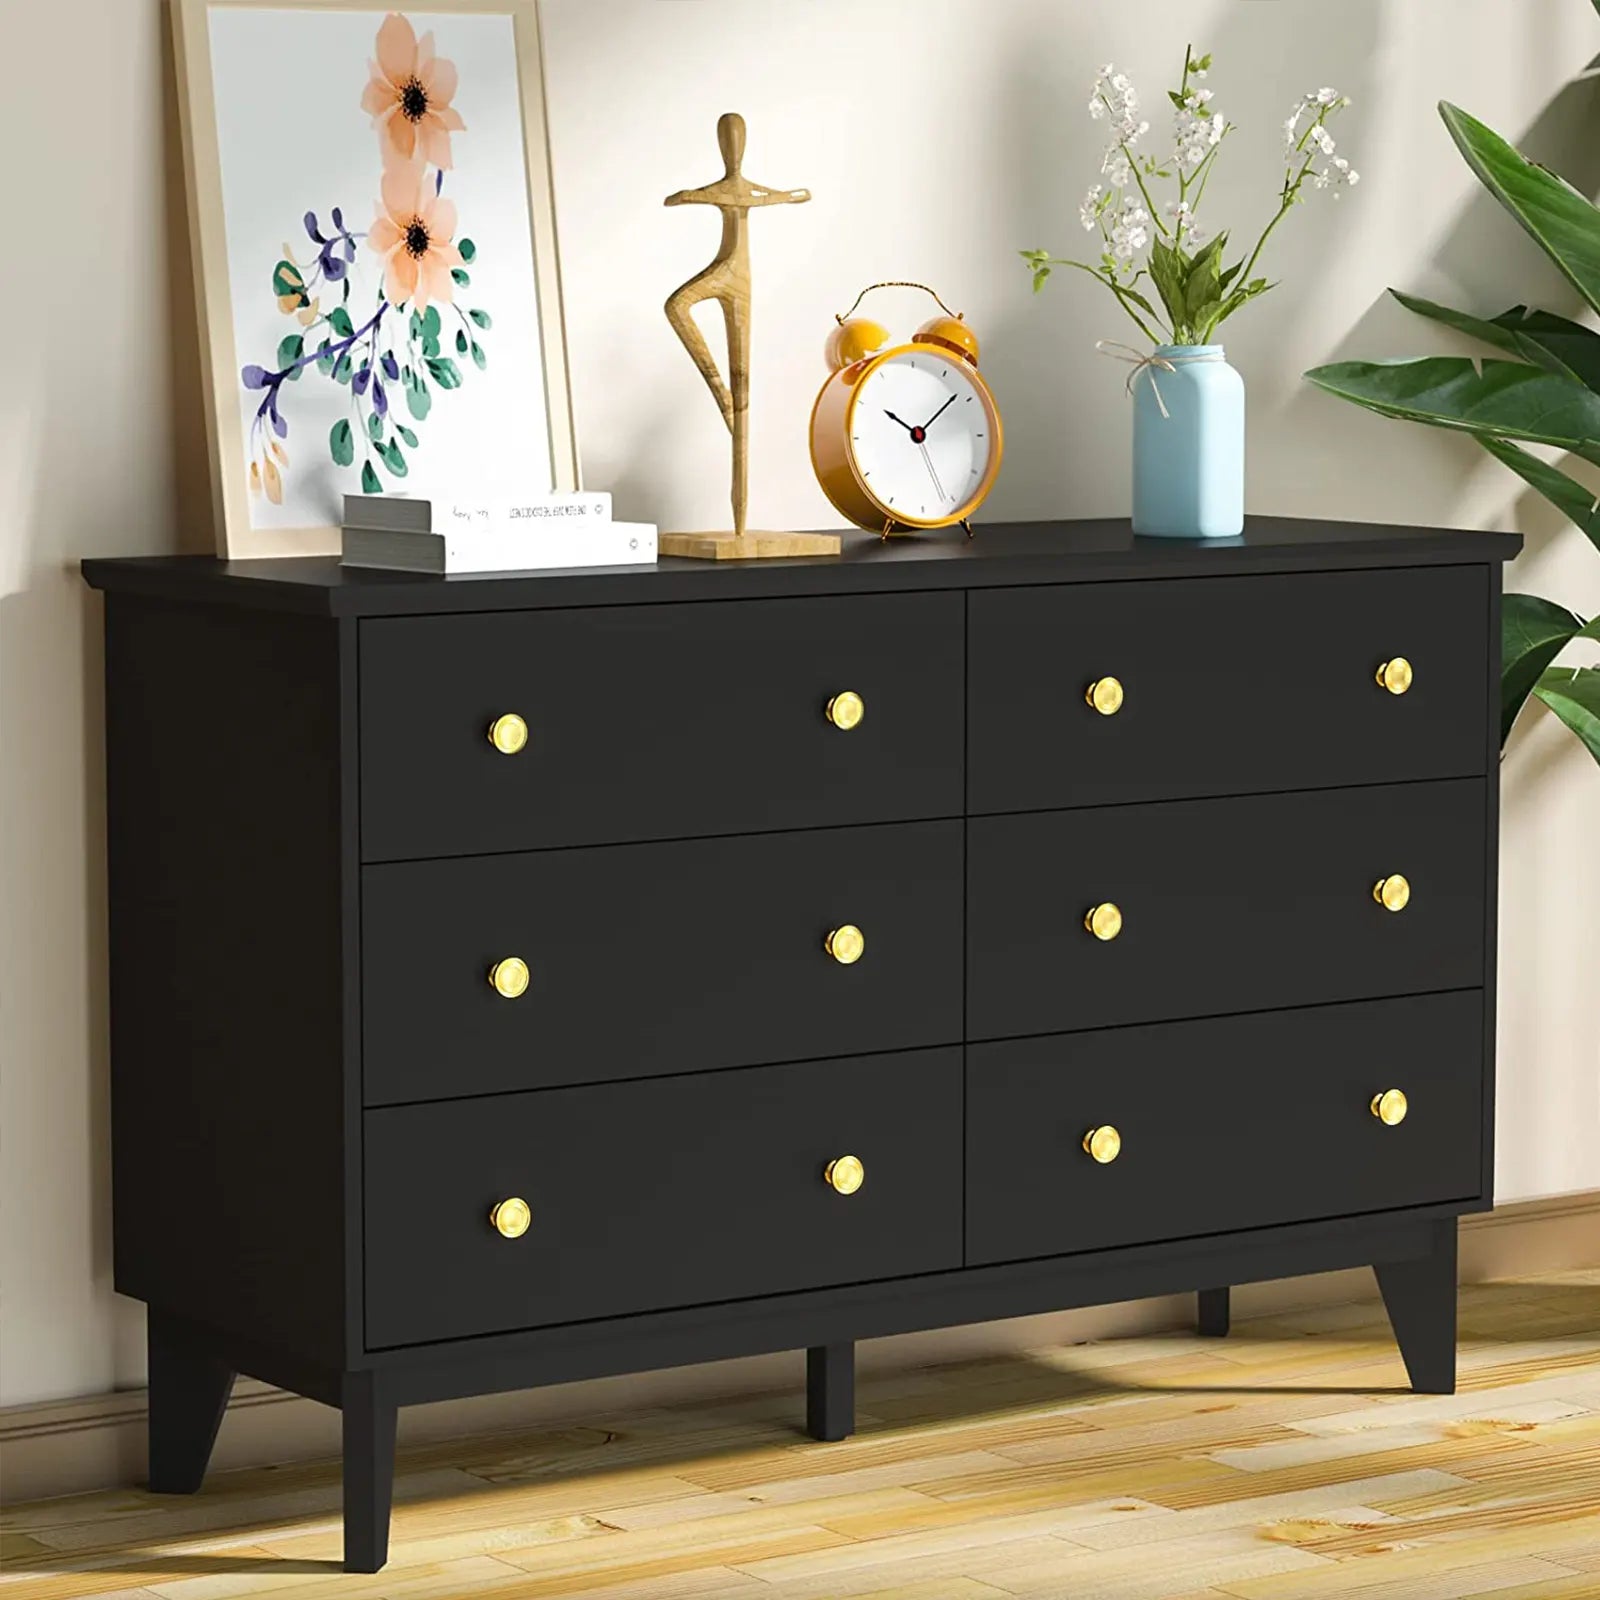 Wood Dressers & Chest of Drawers Storage Cabinet with Wide Drawers